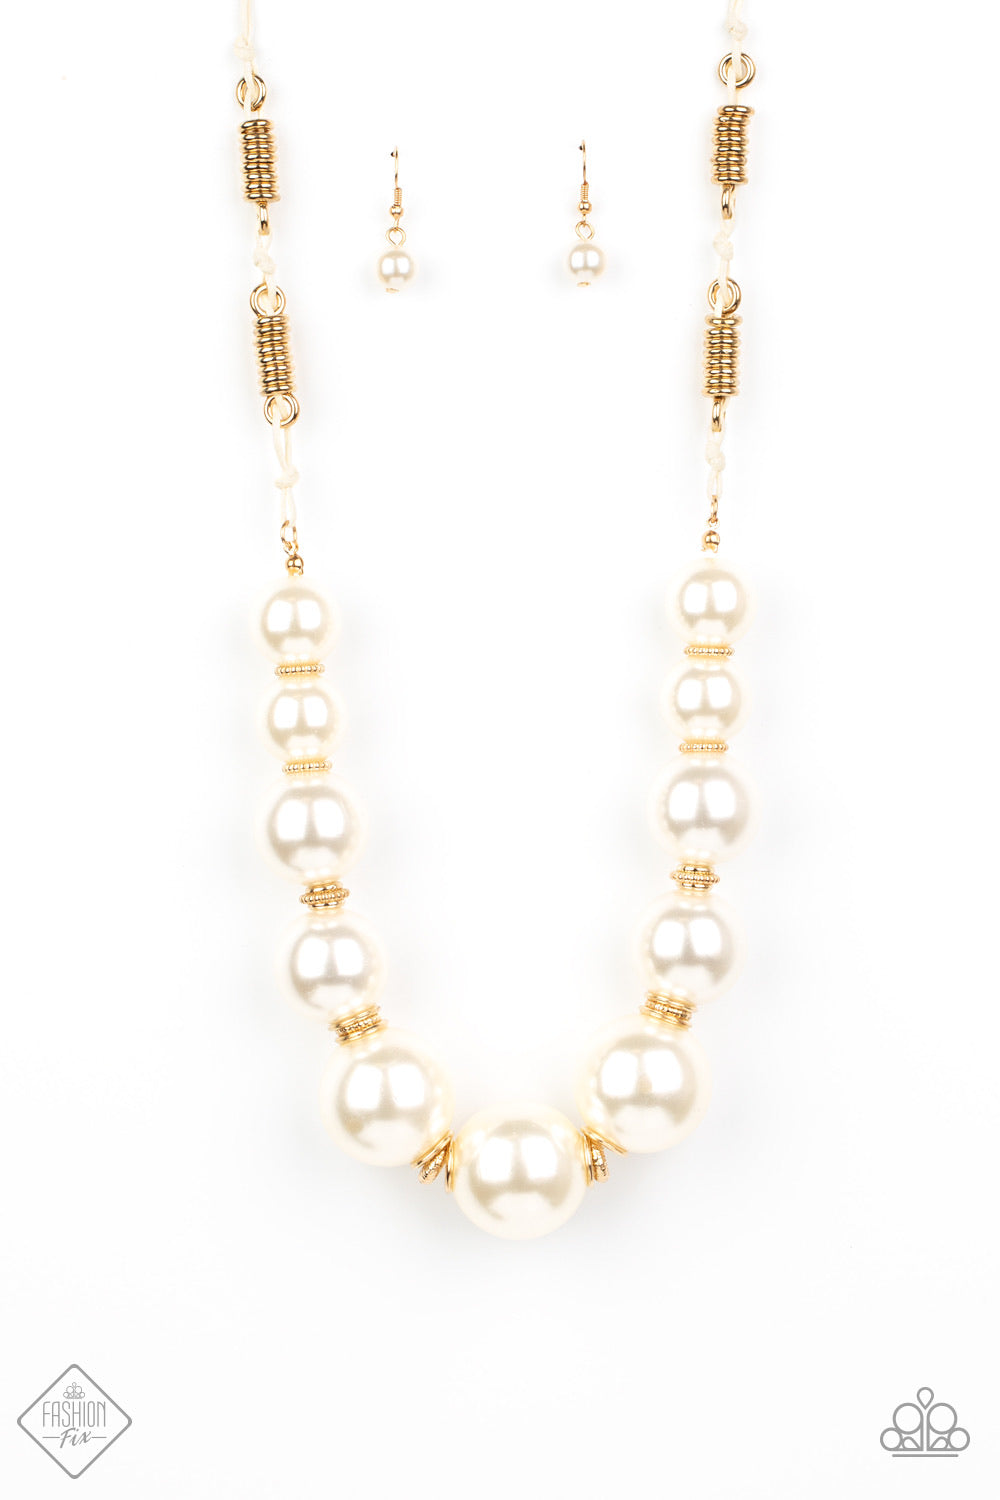 Paparazzi Necklaces  -  Pearly Prosperity - Gold (October 2020 Fashion Fix)